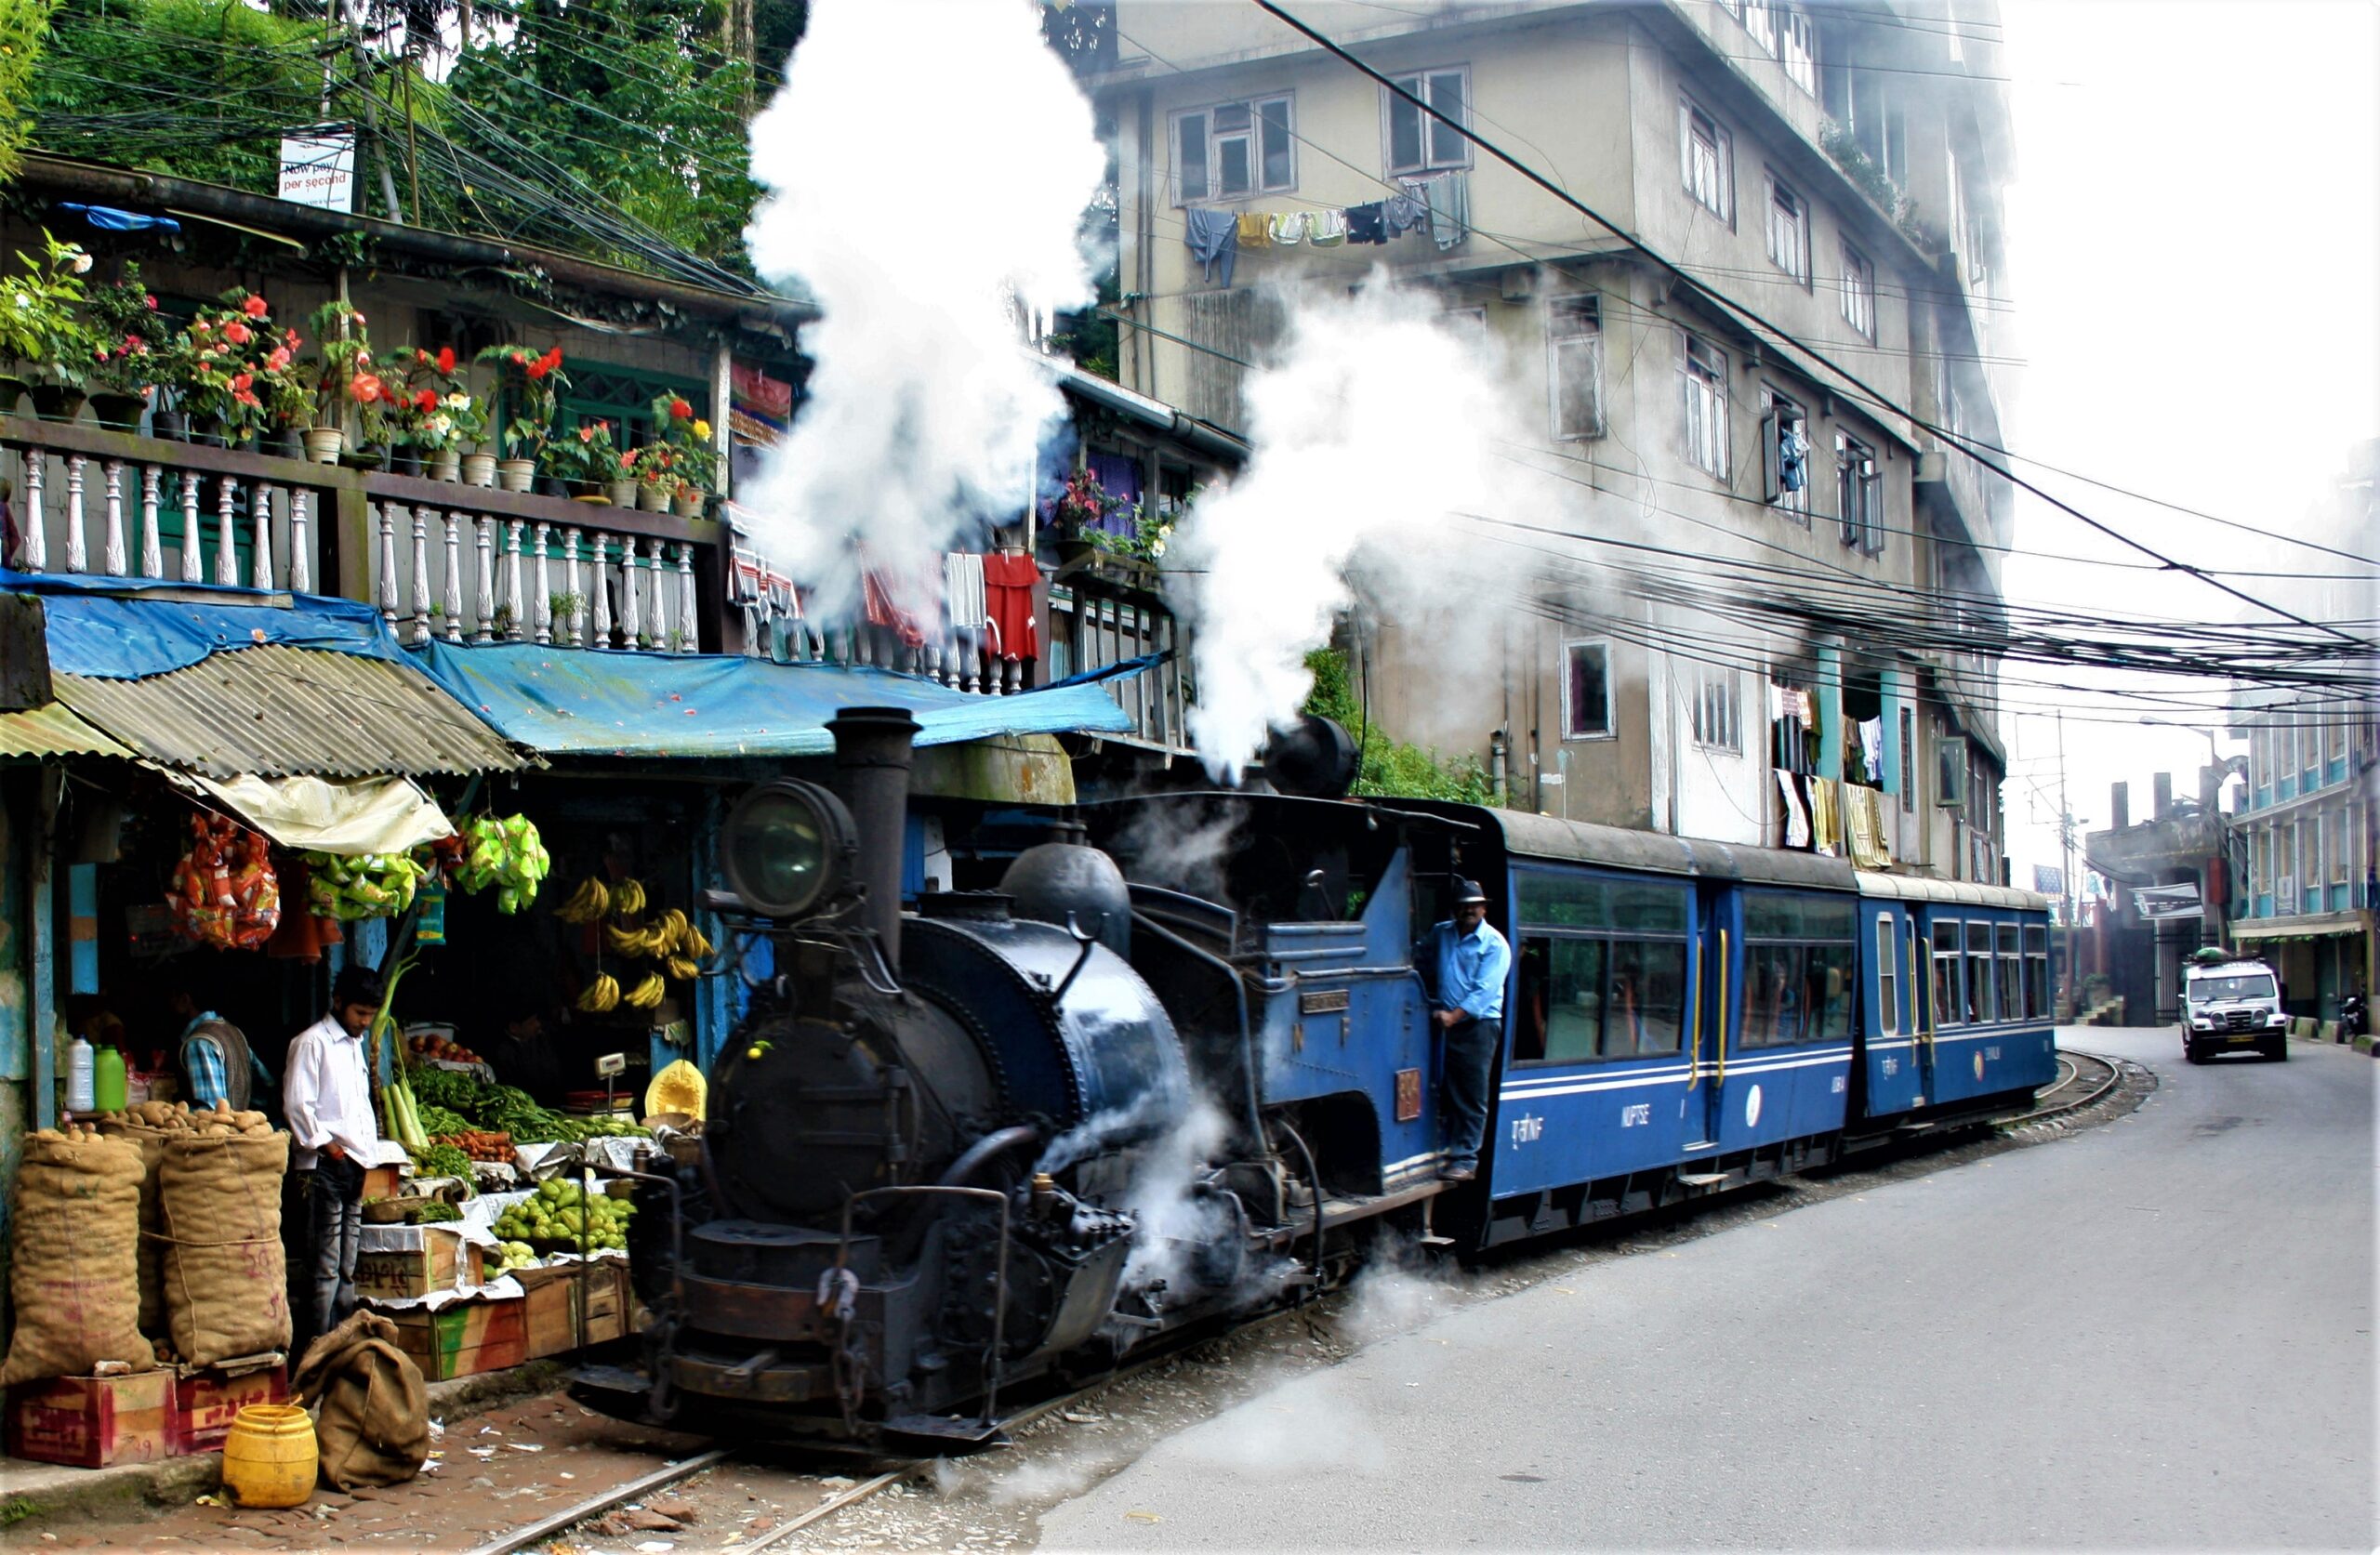 Darjeeling a charming and vibrant hill station for adventure, culture, and relaxation